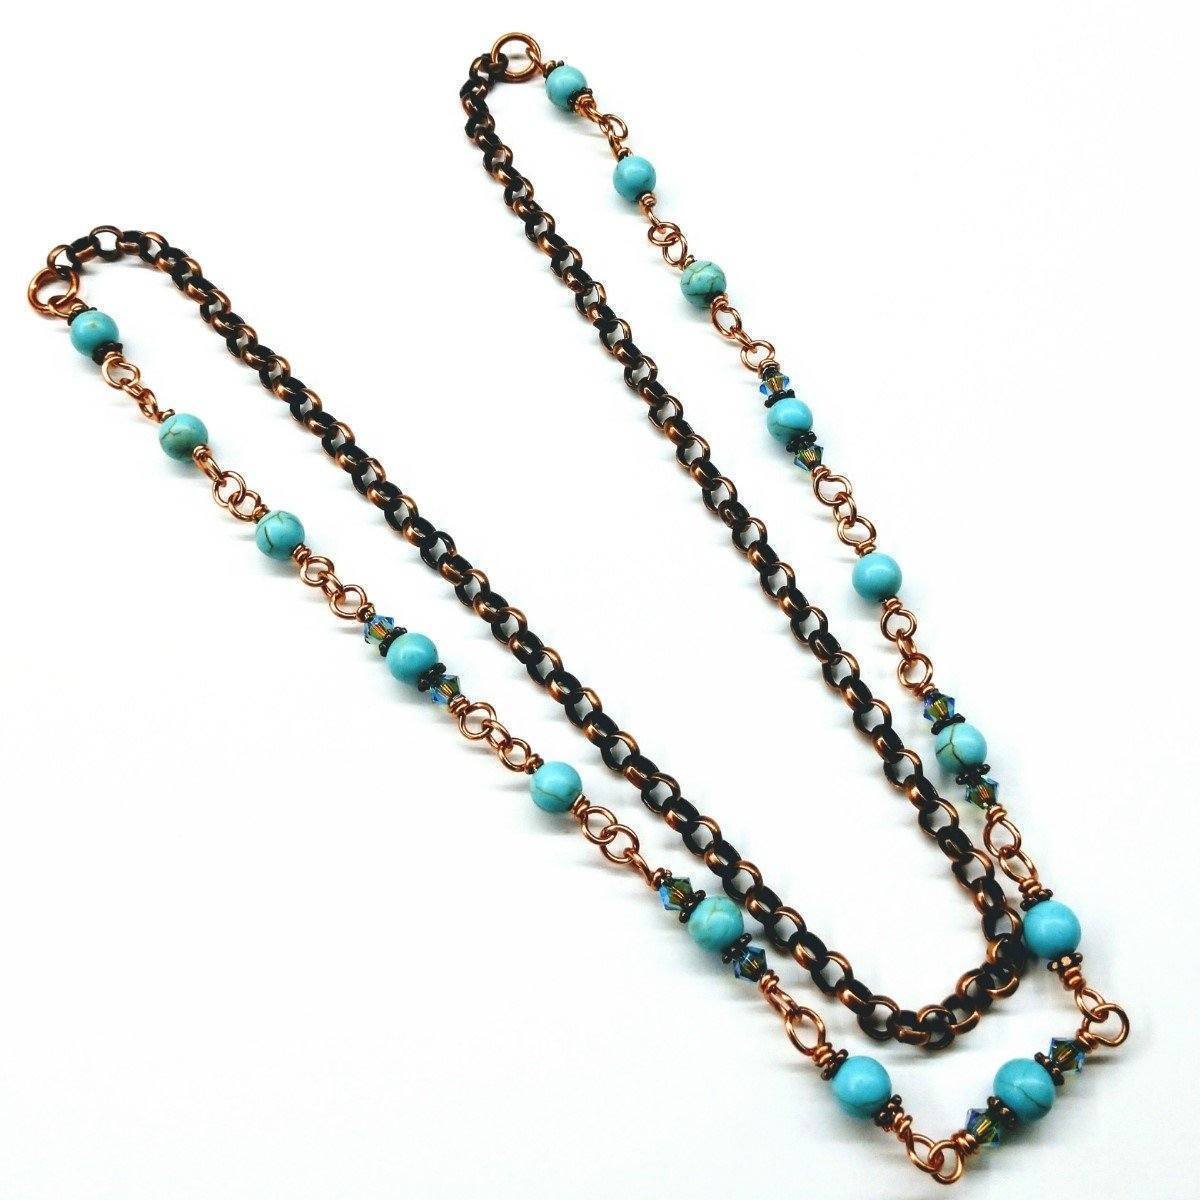 Handcrafted 24-Inch Copper Turquoise Necklace with Swarovski Crystals and Chinese Gemstones - Necklaces - Bijou Her -  -  - 